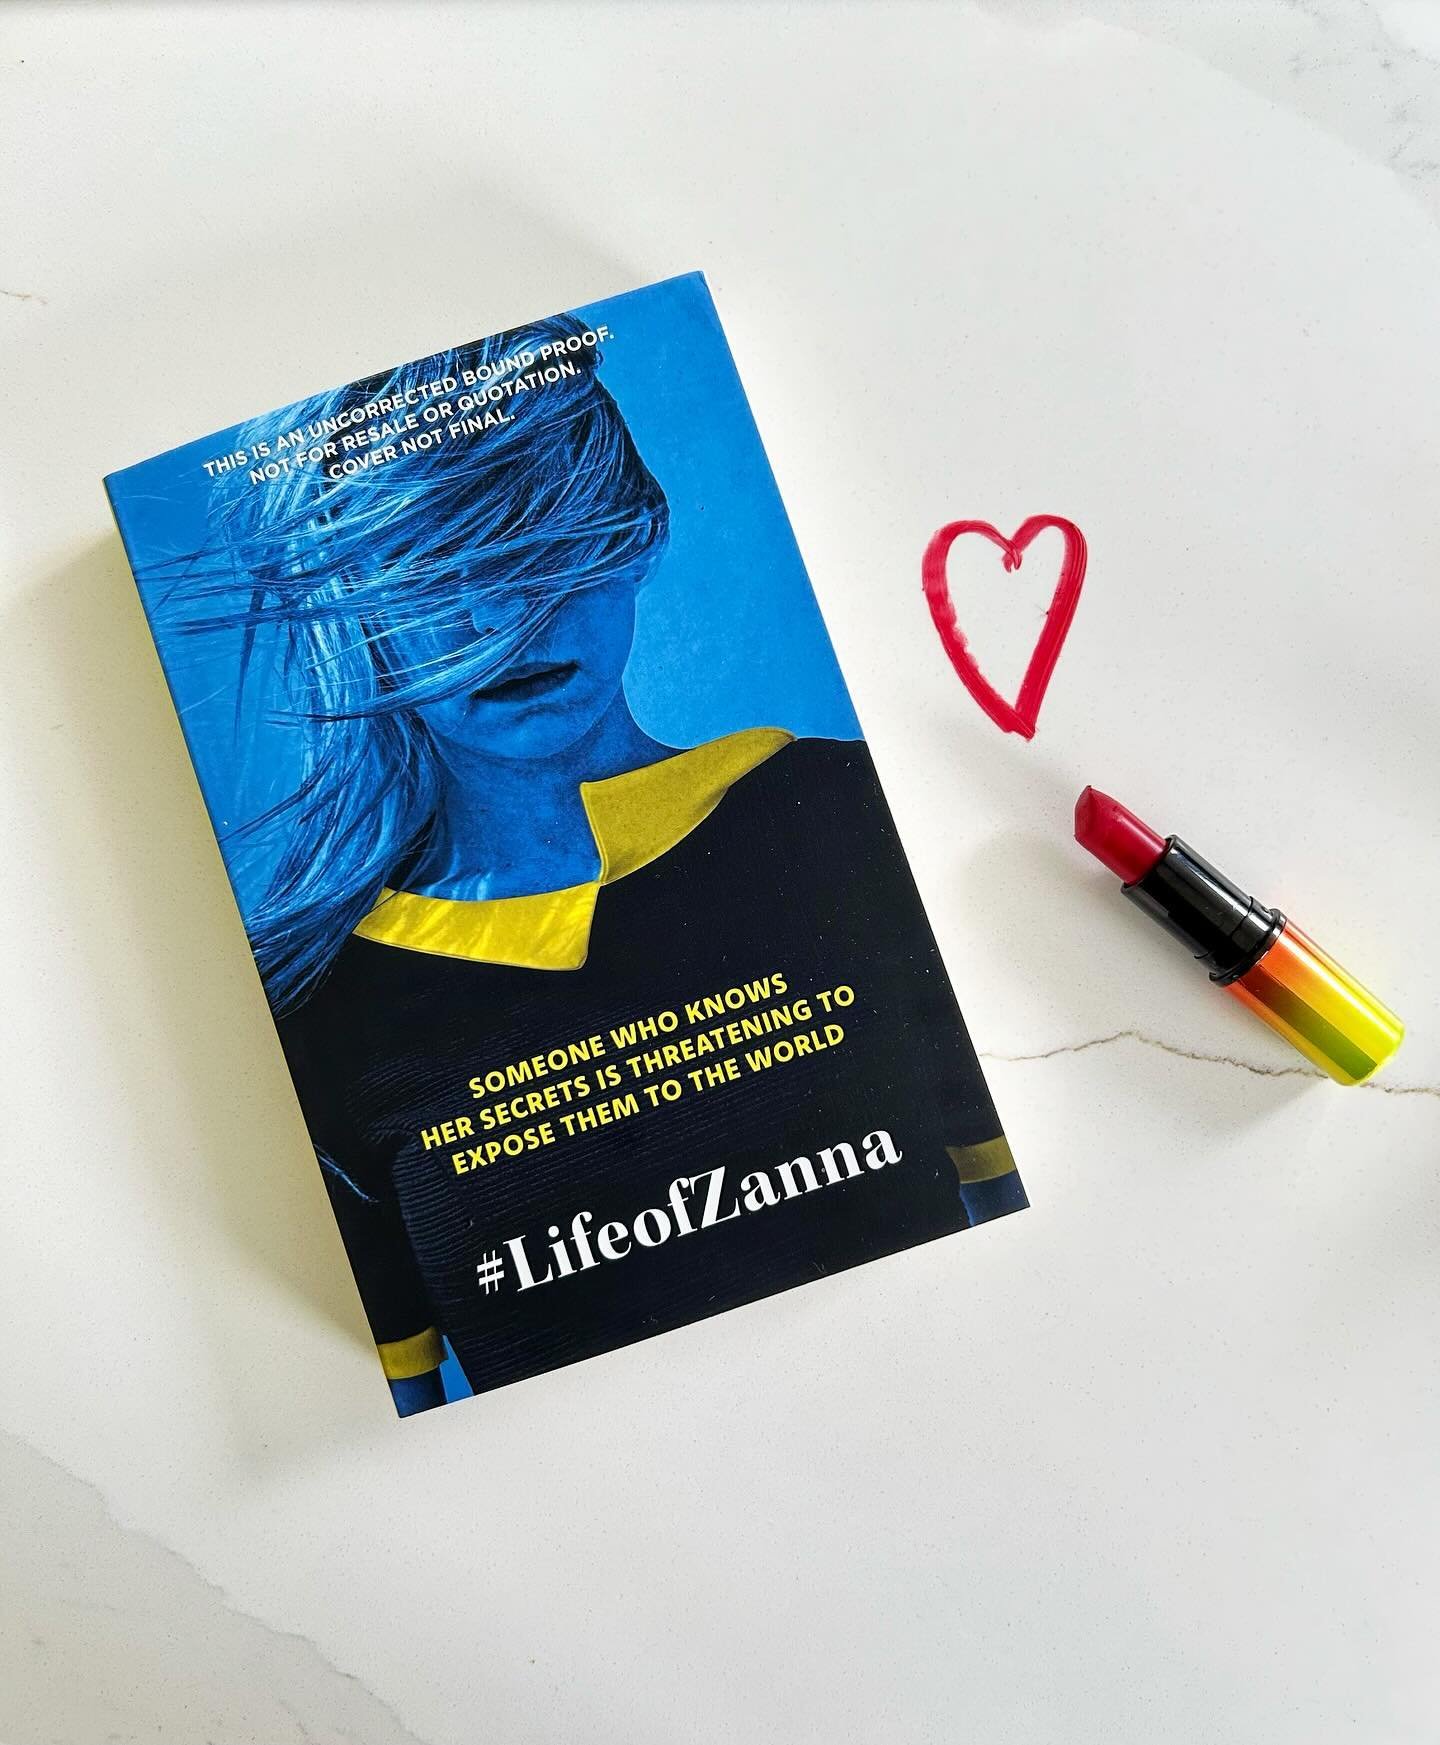 📢 Bloggers/ Bookstagrammers! 📢 Review copy alert!

Exciting debut author alert! This is a gripping psychological thriller, publishing in May. Life of Zanna looks at (often toxic) female friendships, power struggles, and the darker side of social me